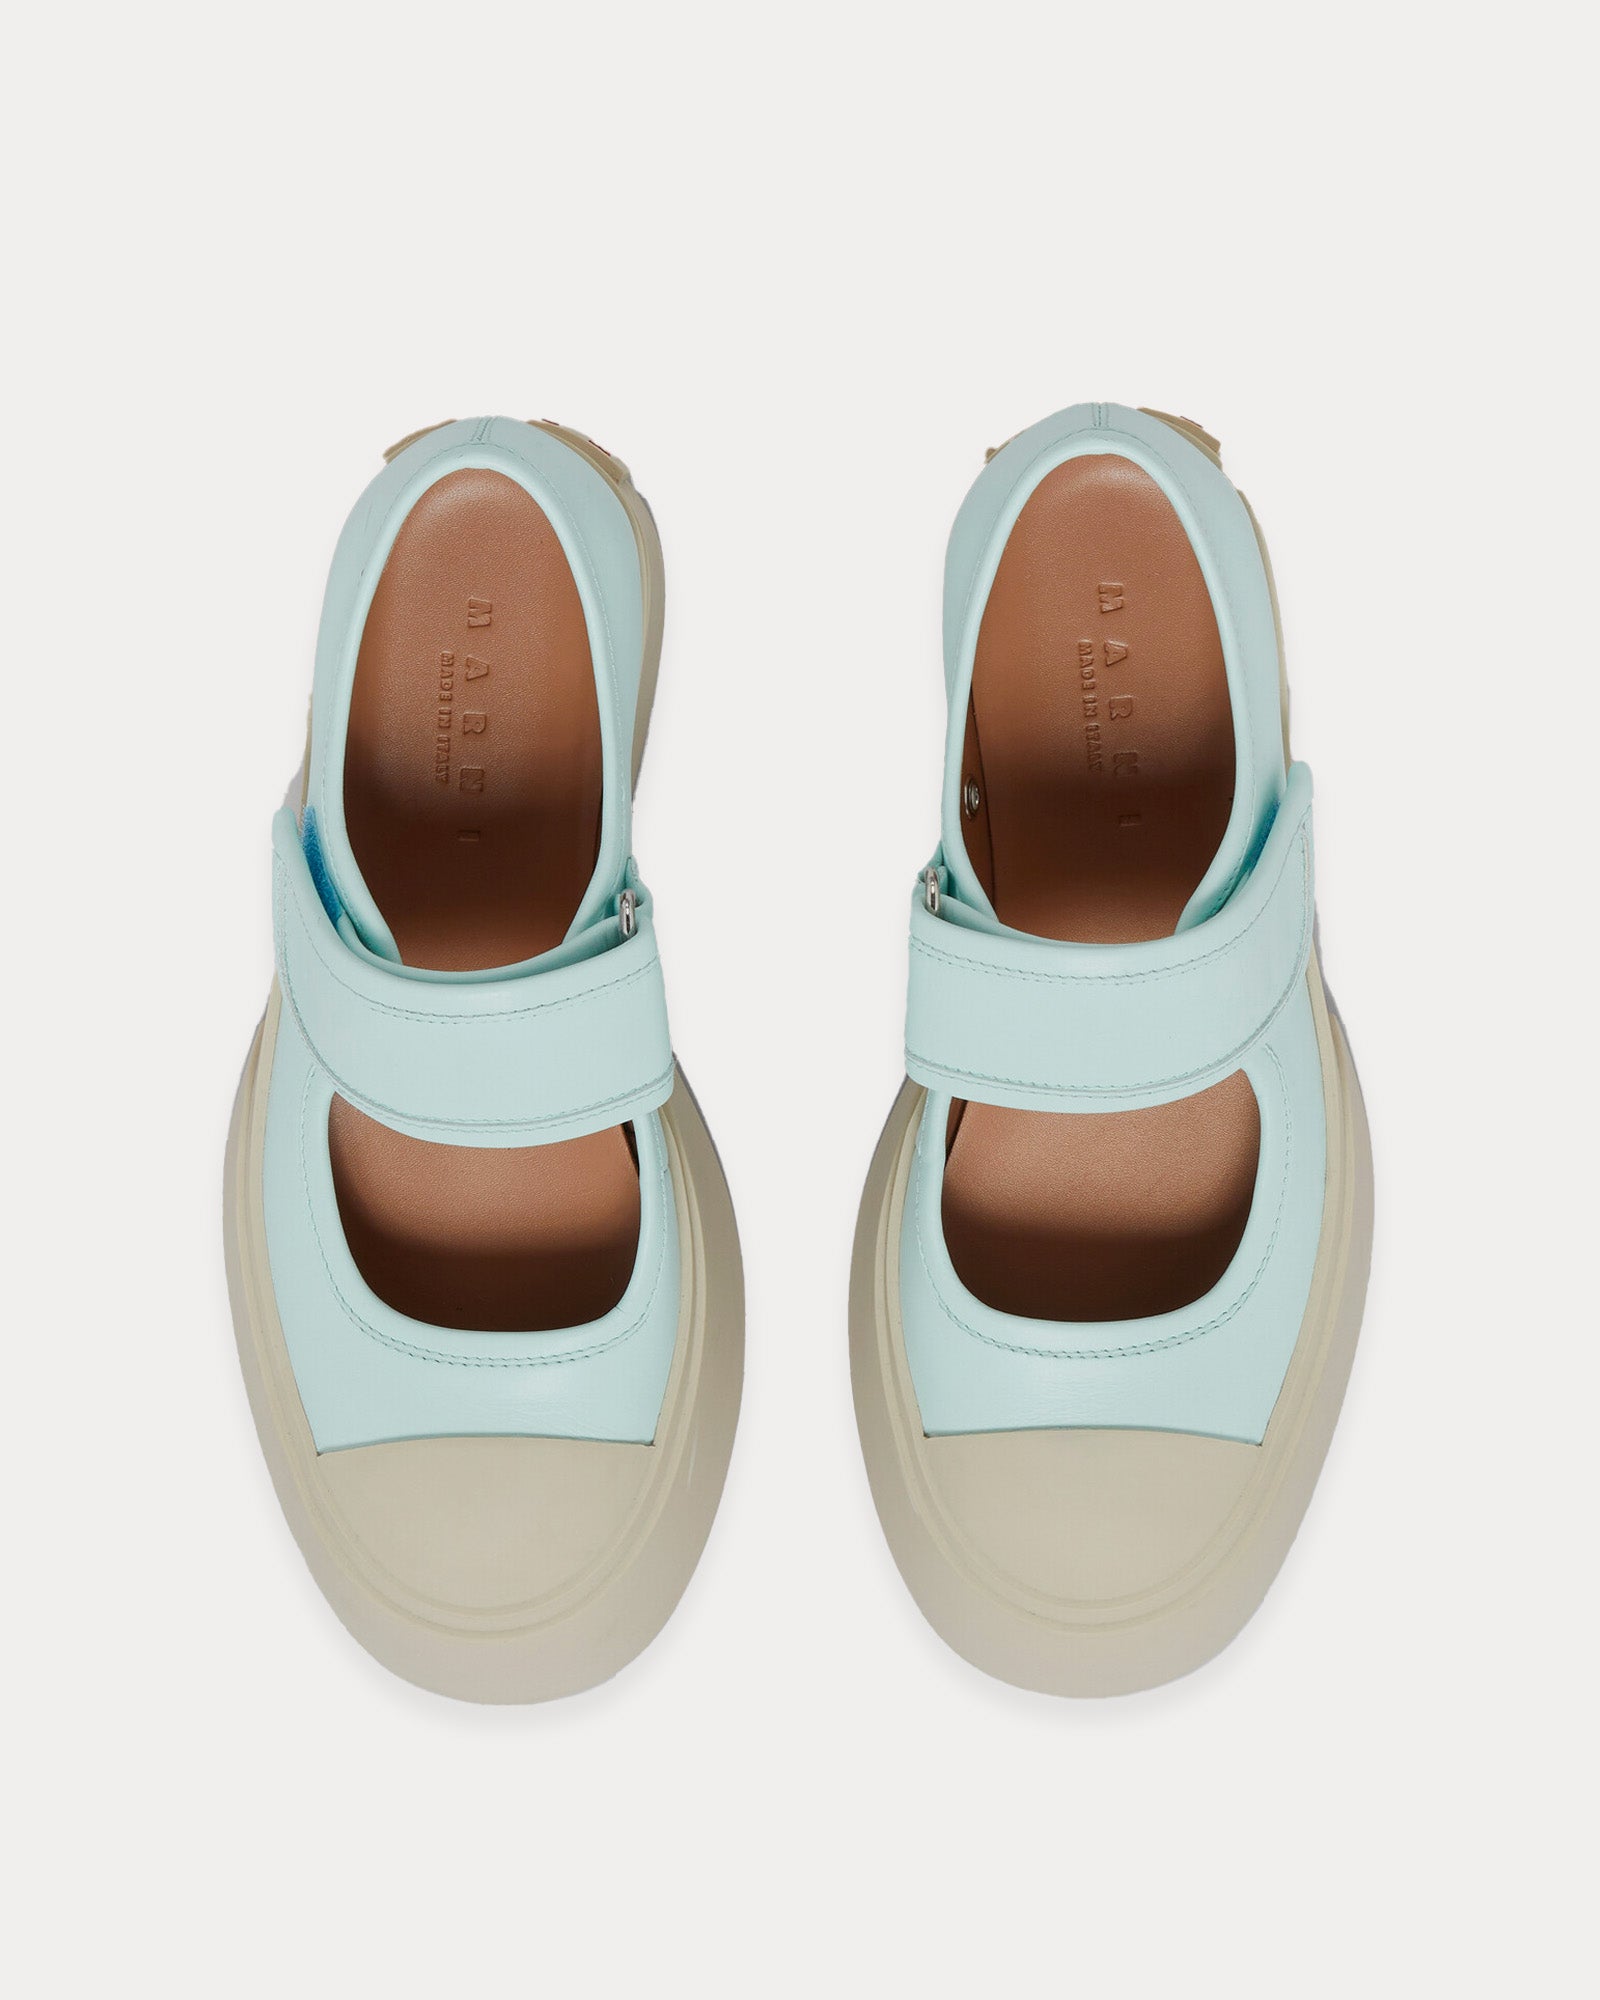 Marni - Mary Jane Leather Light Blue Slip On Sneakers